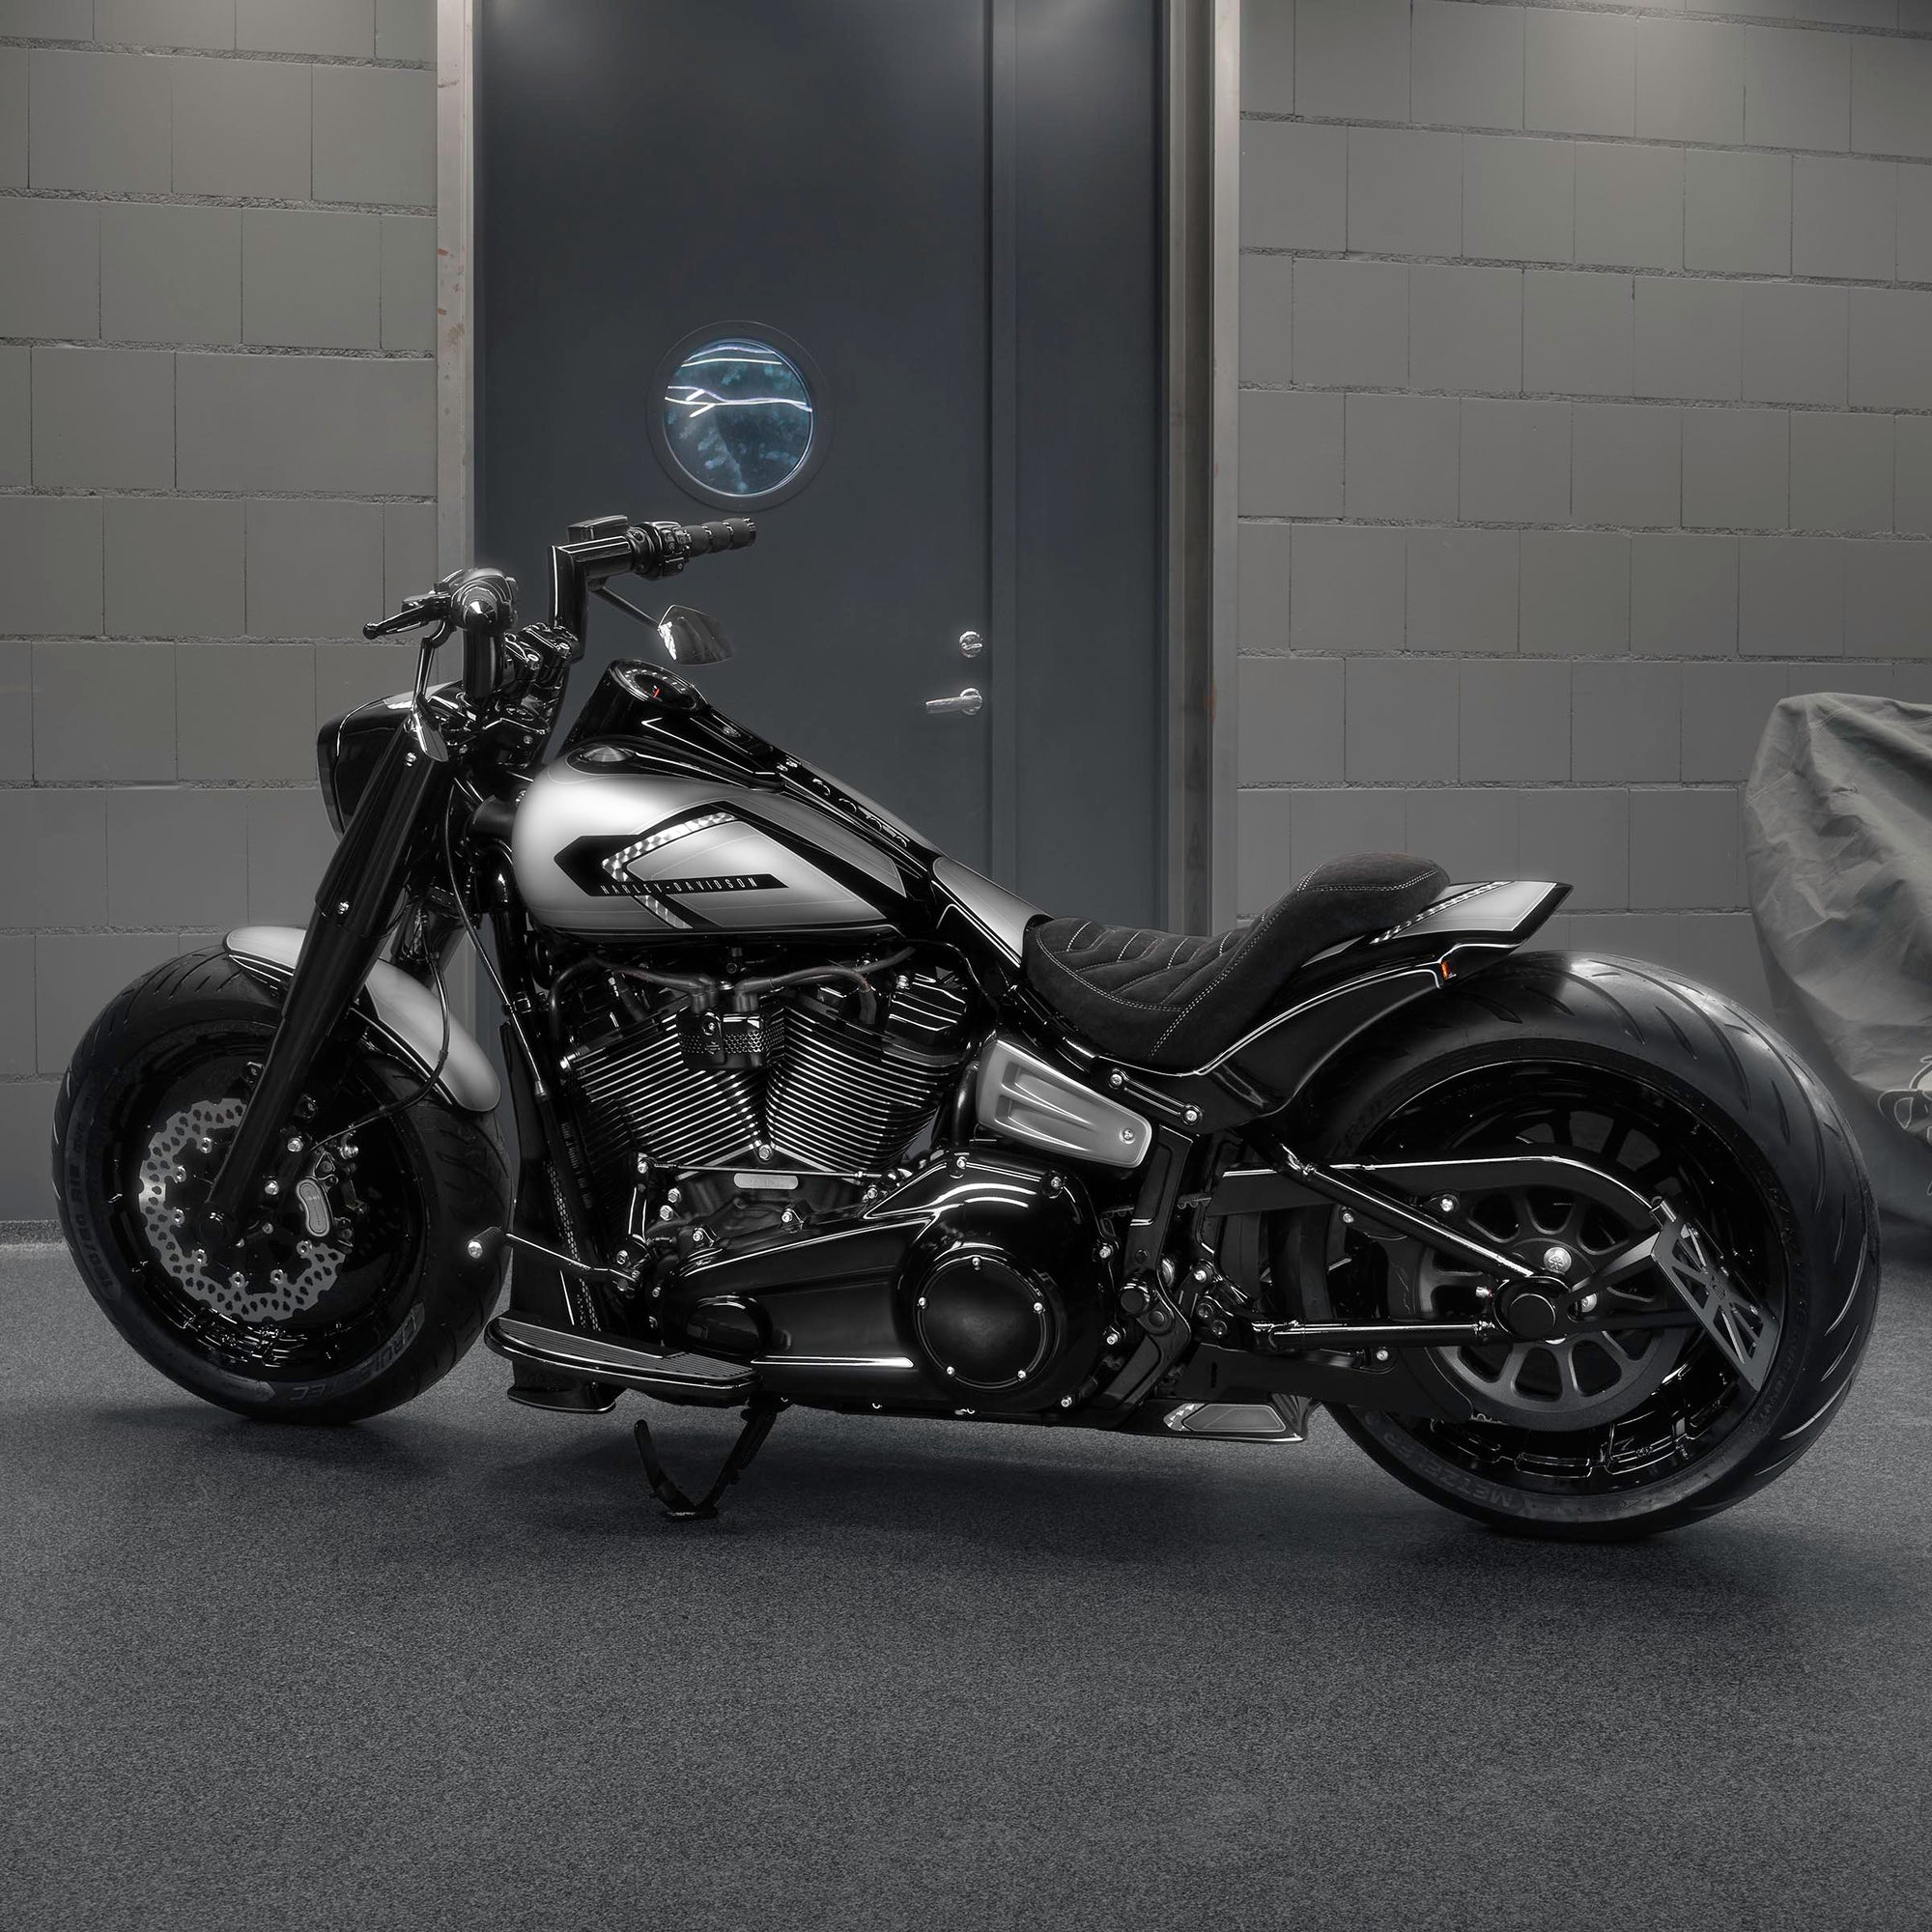 Harley Davidson motorcycle with Killer Custom parts from the side in a modern bike shop